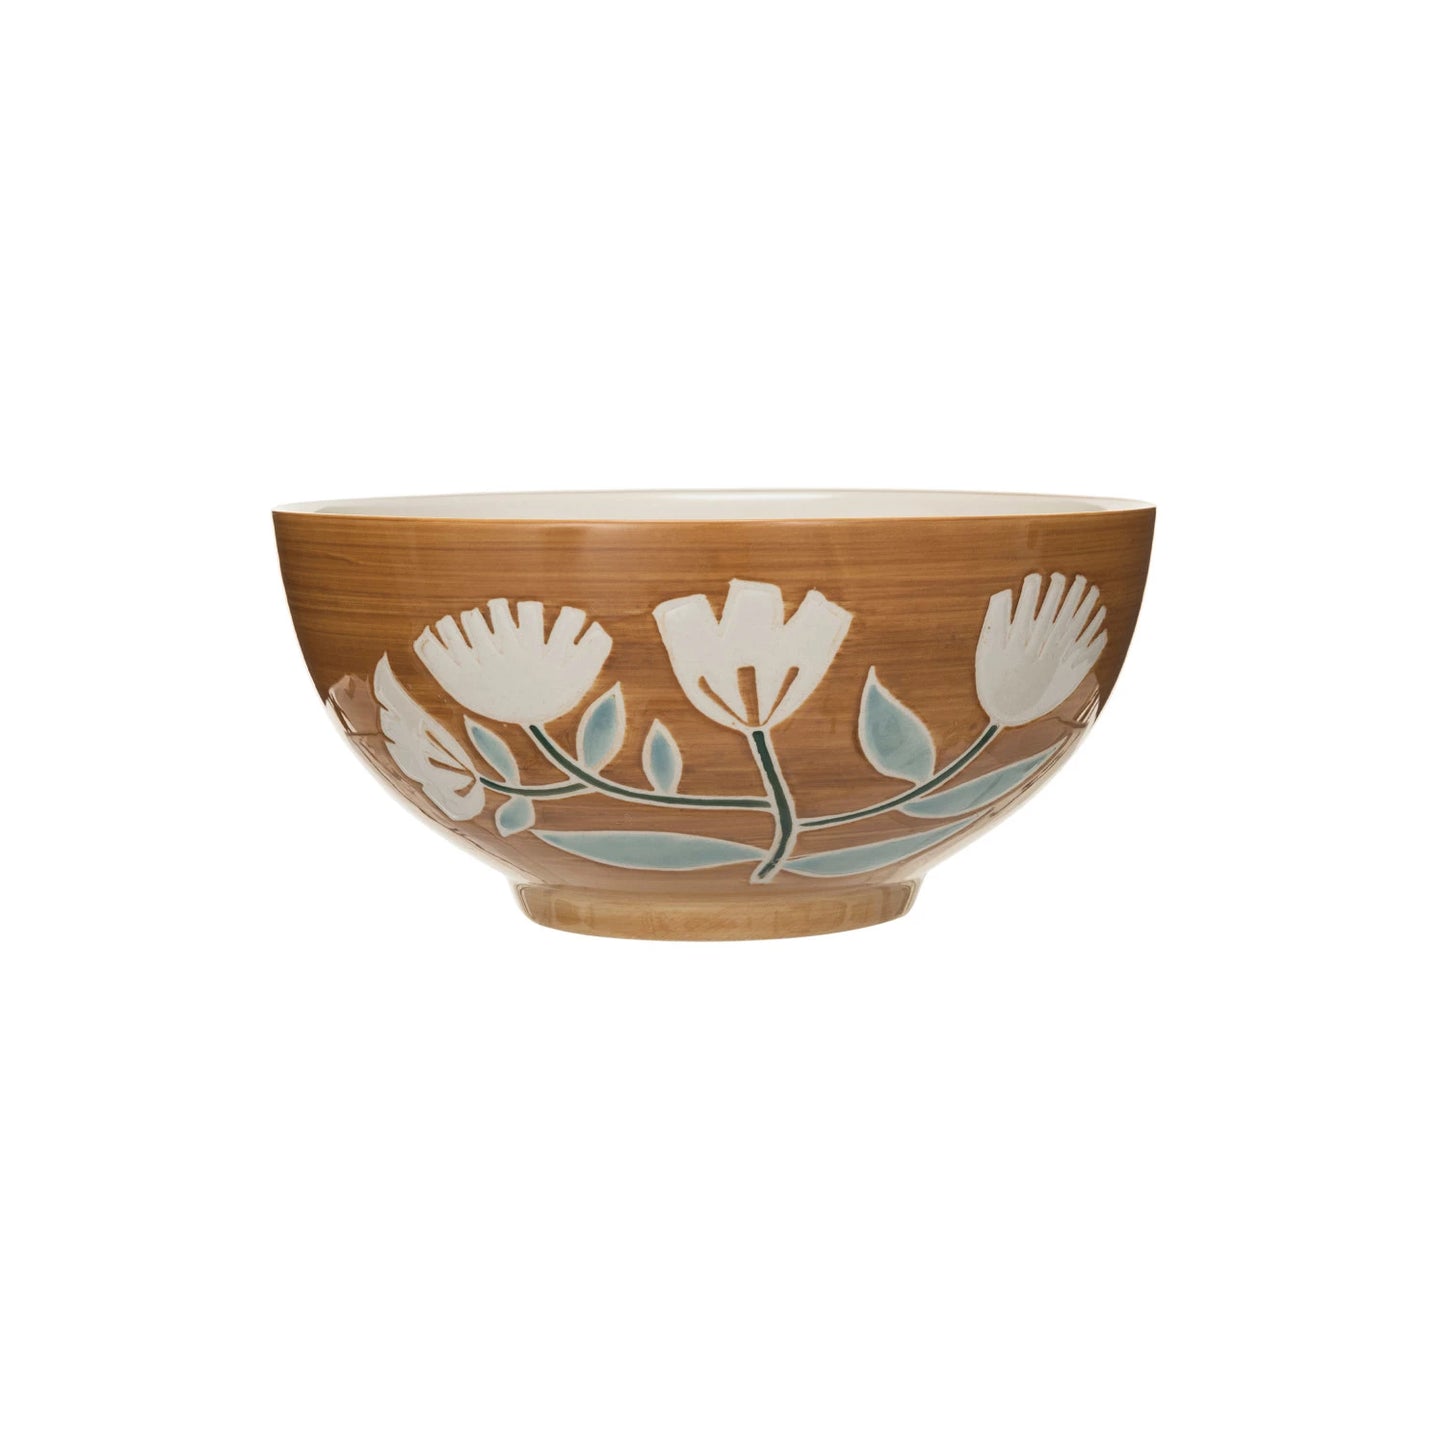 Hand-Painted Cereal Bowl - White Flower, Blue Leaf